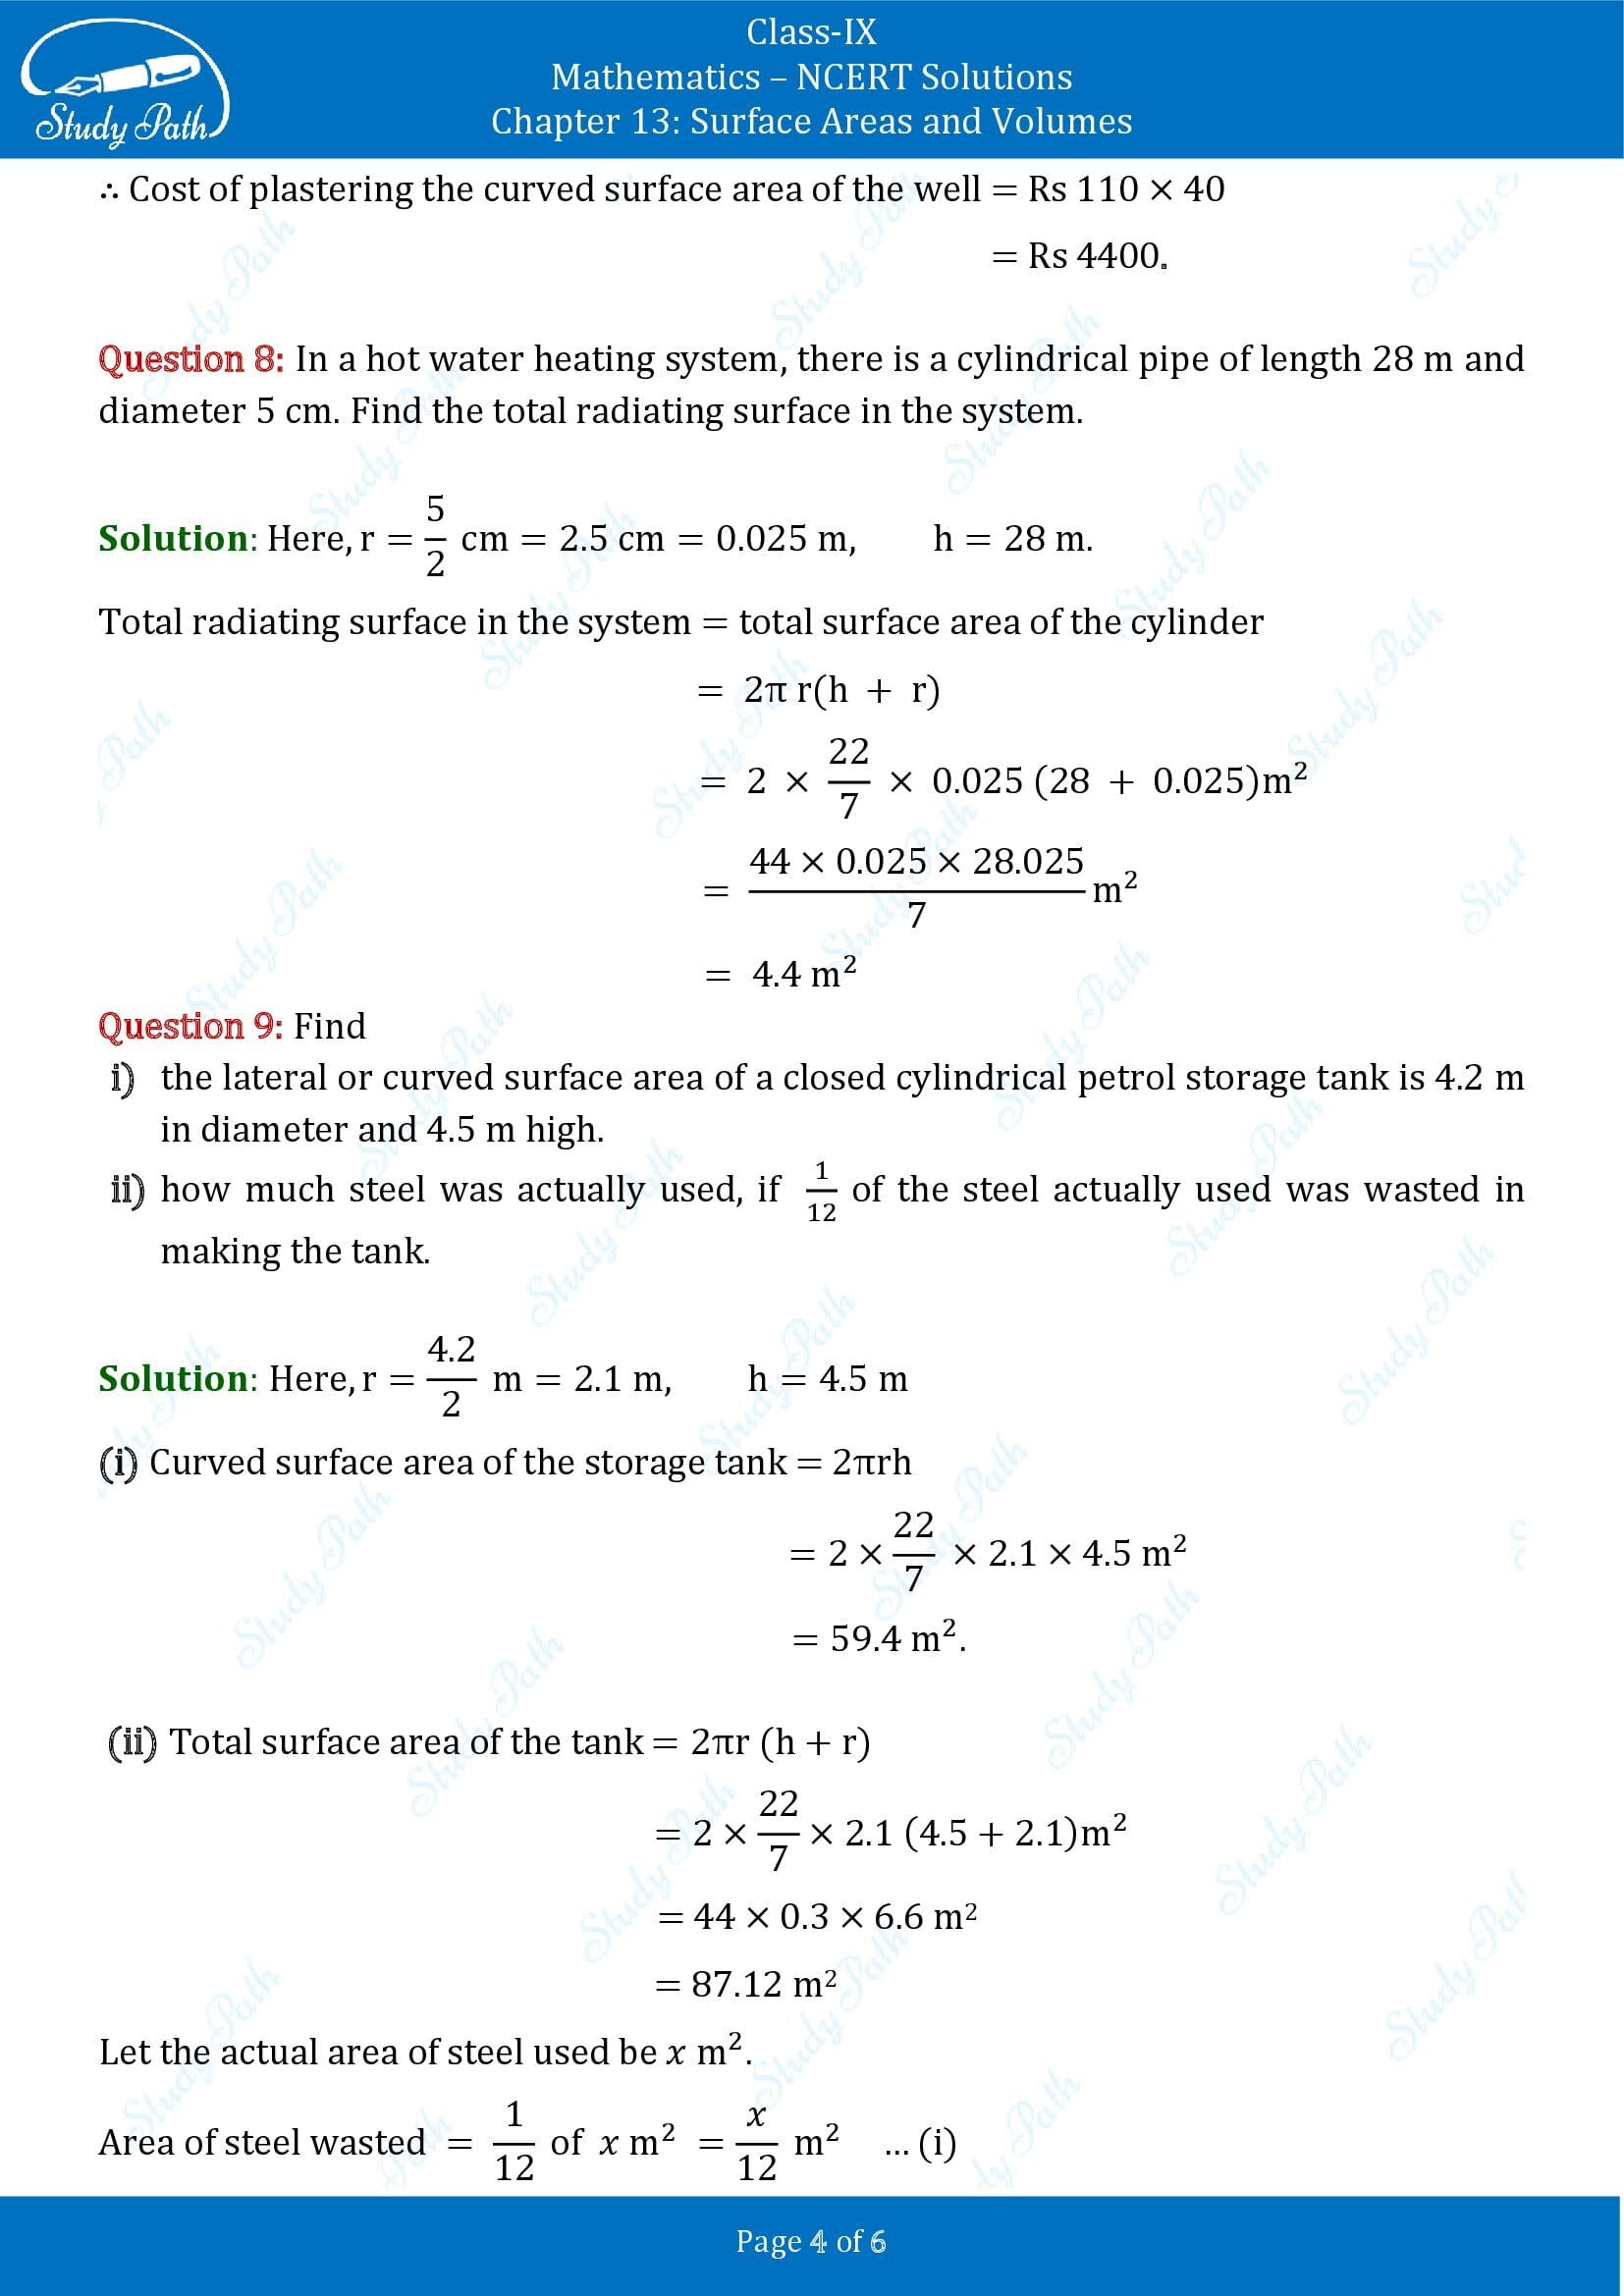 NCERT Solutions for Class 9 Maths Chapter 13 Surface Areas and Volumes Exercise 13.2 00004